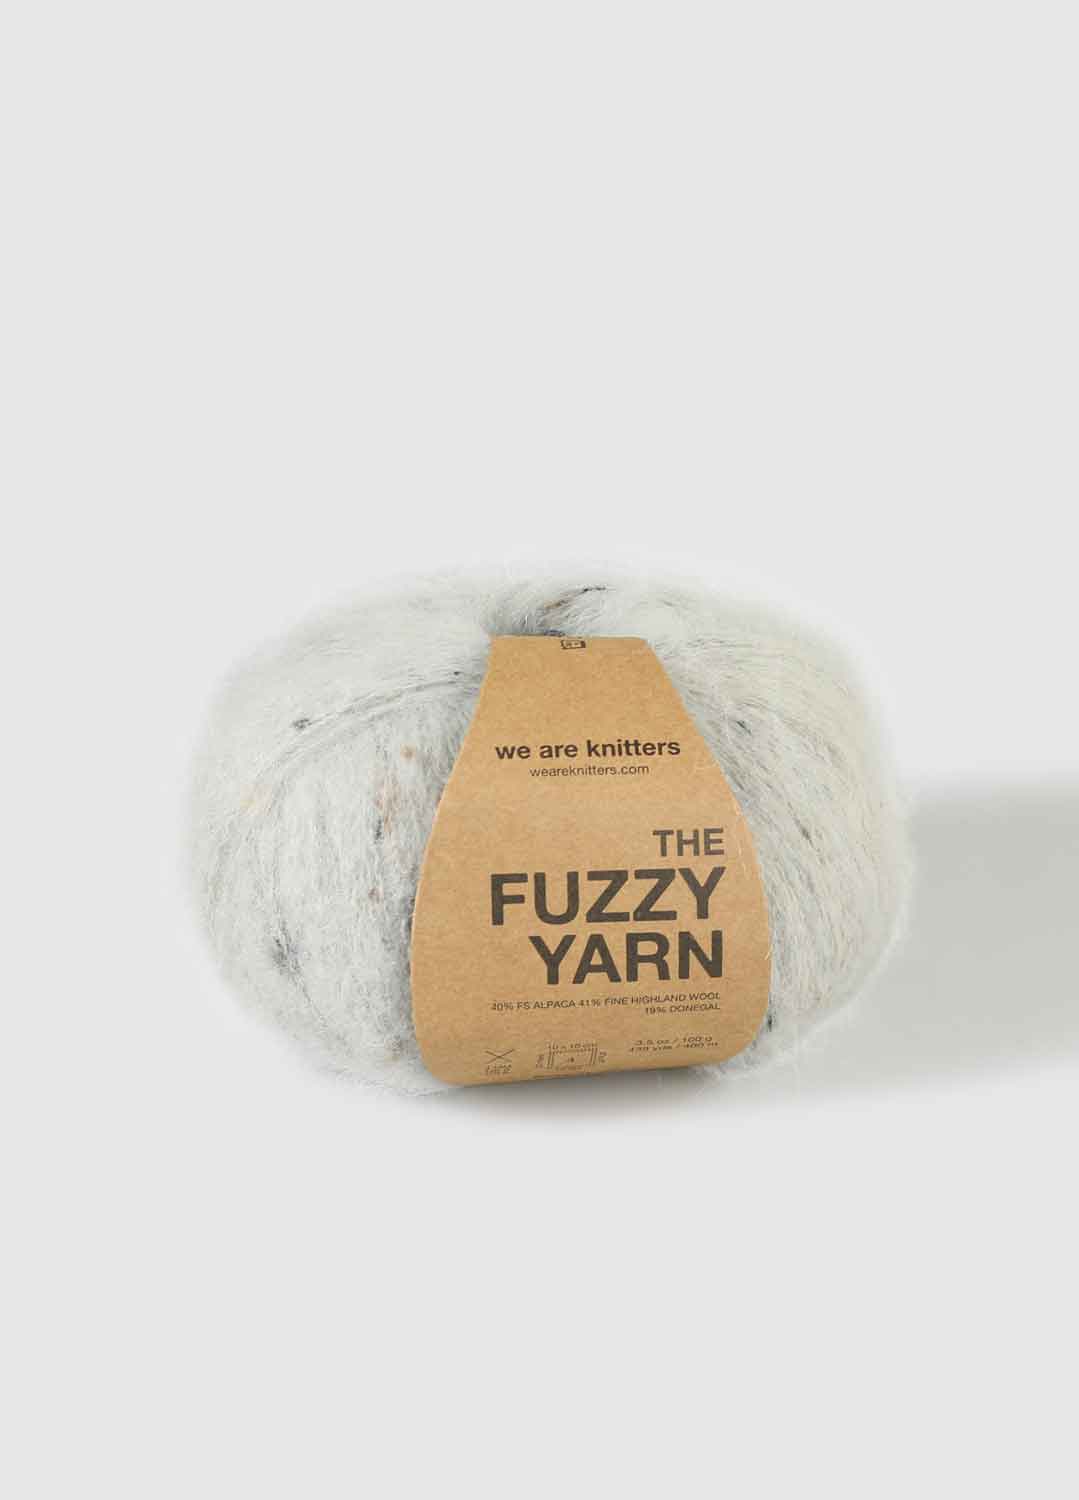 Yarn and Colors Furry 001 White